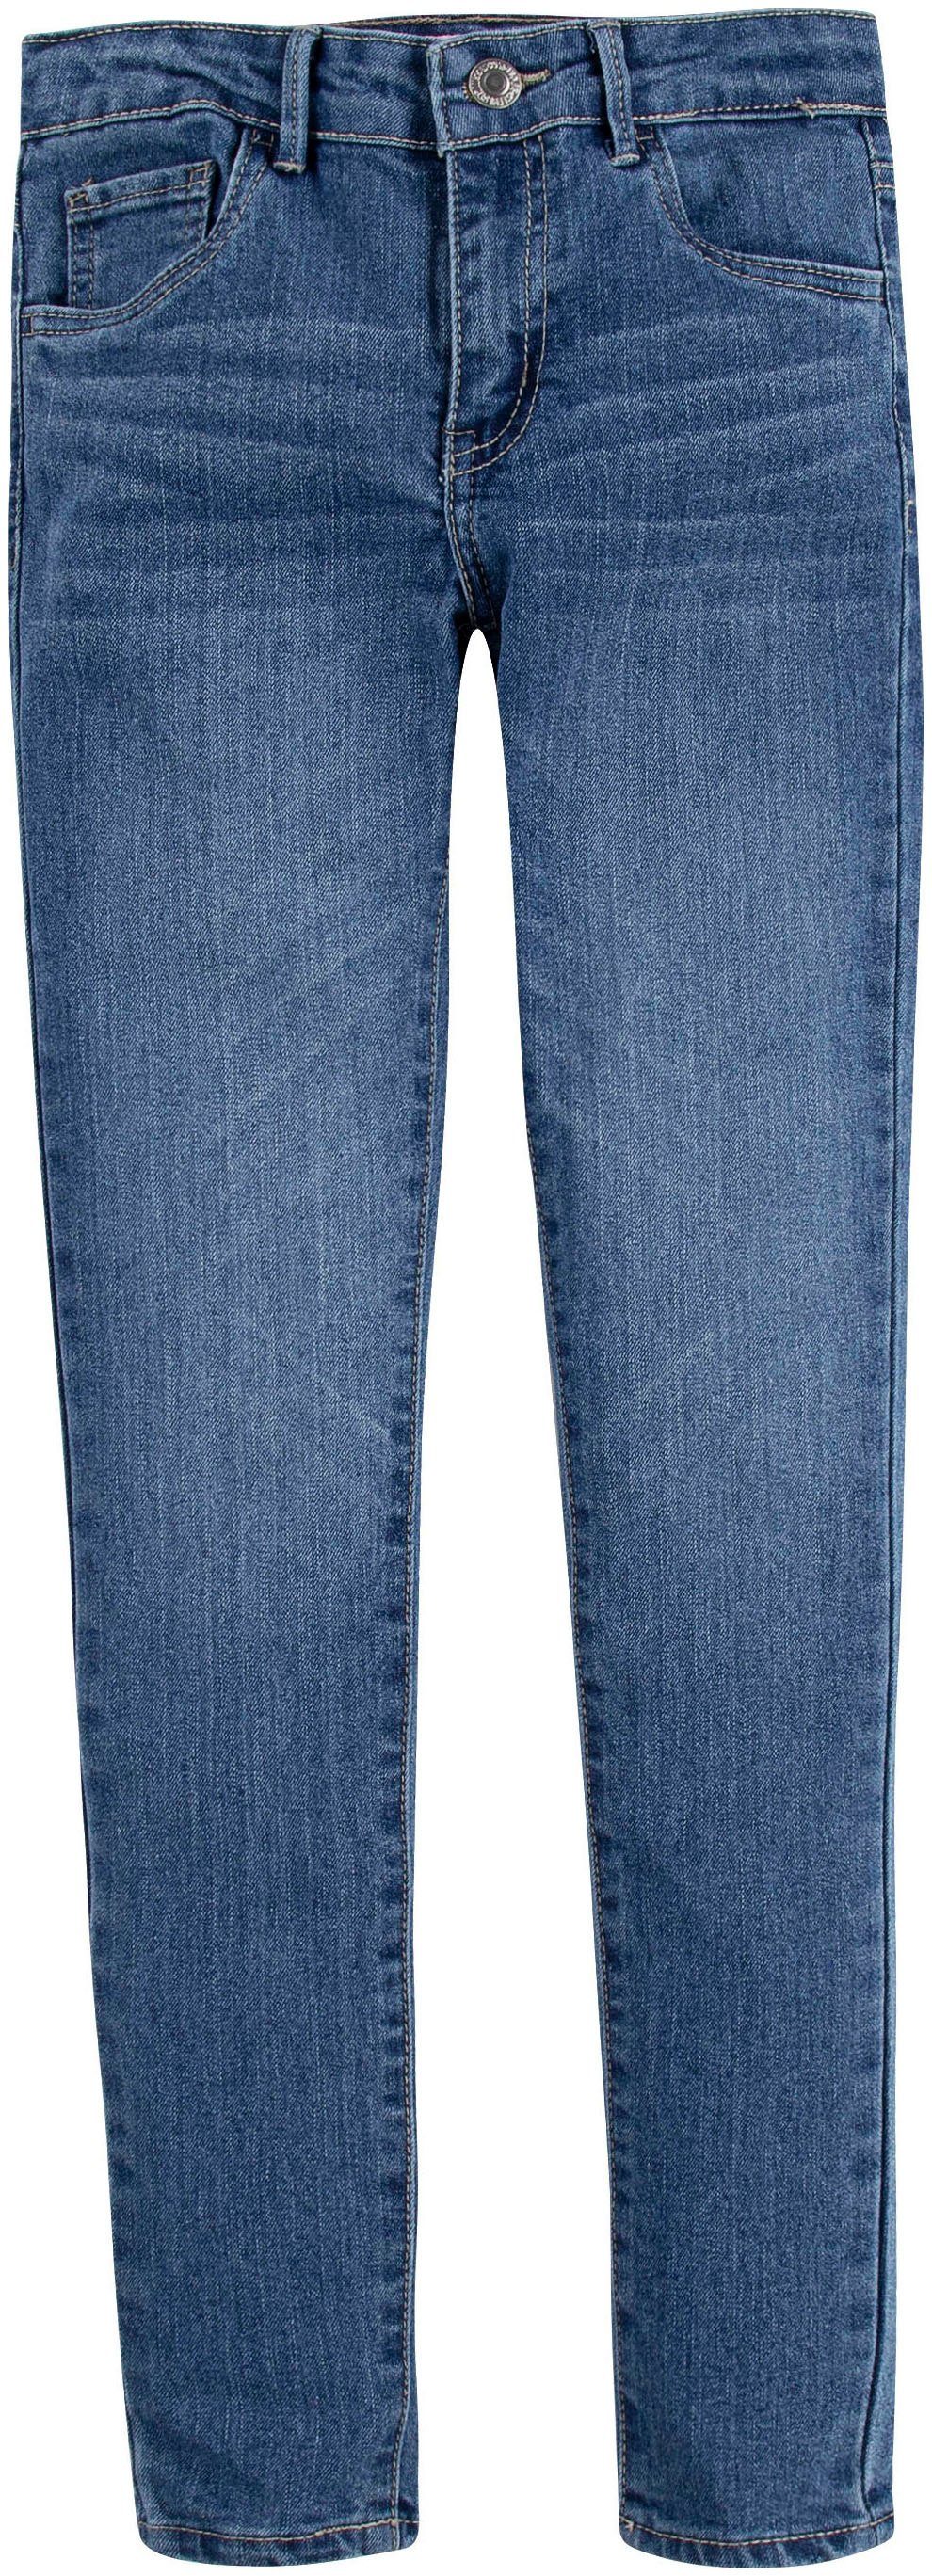 blue JEANS for Kids Levi's® SKINNY GIRLS Stretch-Jeans FIT 710™ SUPER used mid